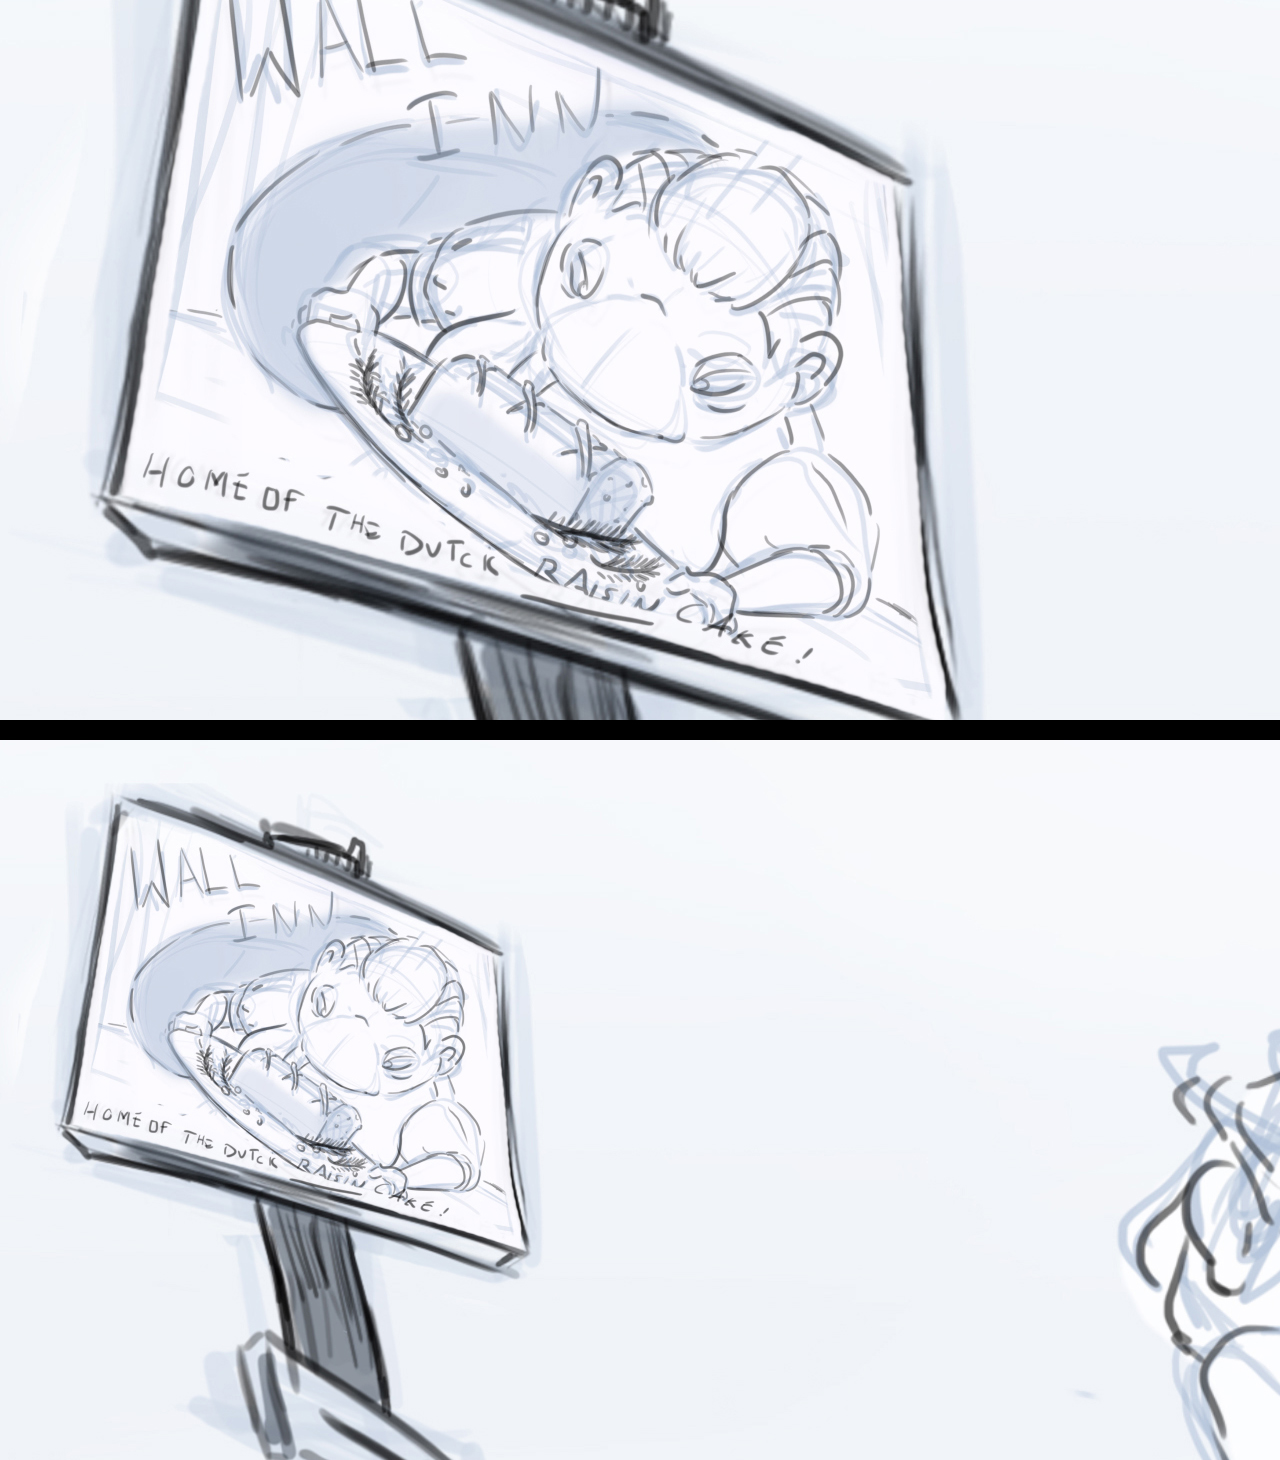 Storyboard sequence from an animated film. Sequence shows billboard of round woman holding a dutch raisin cake. The advertisement is for the Wall Inn.